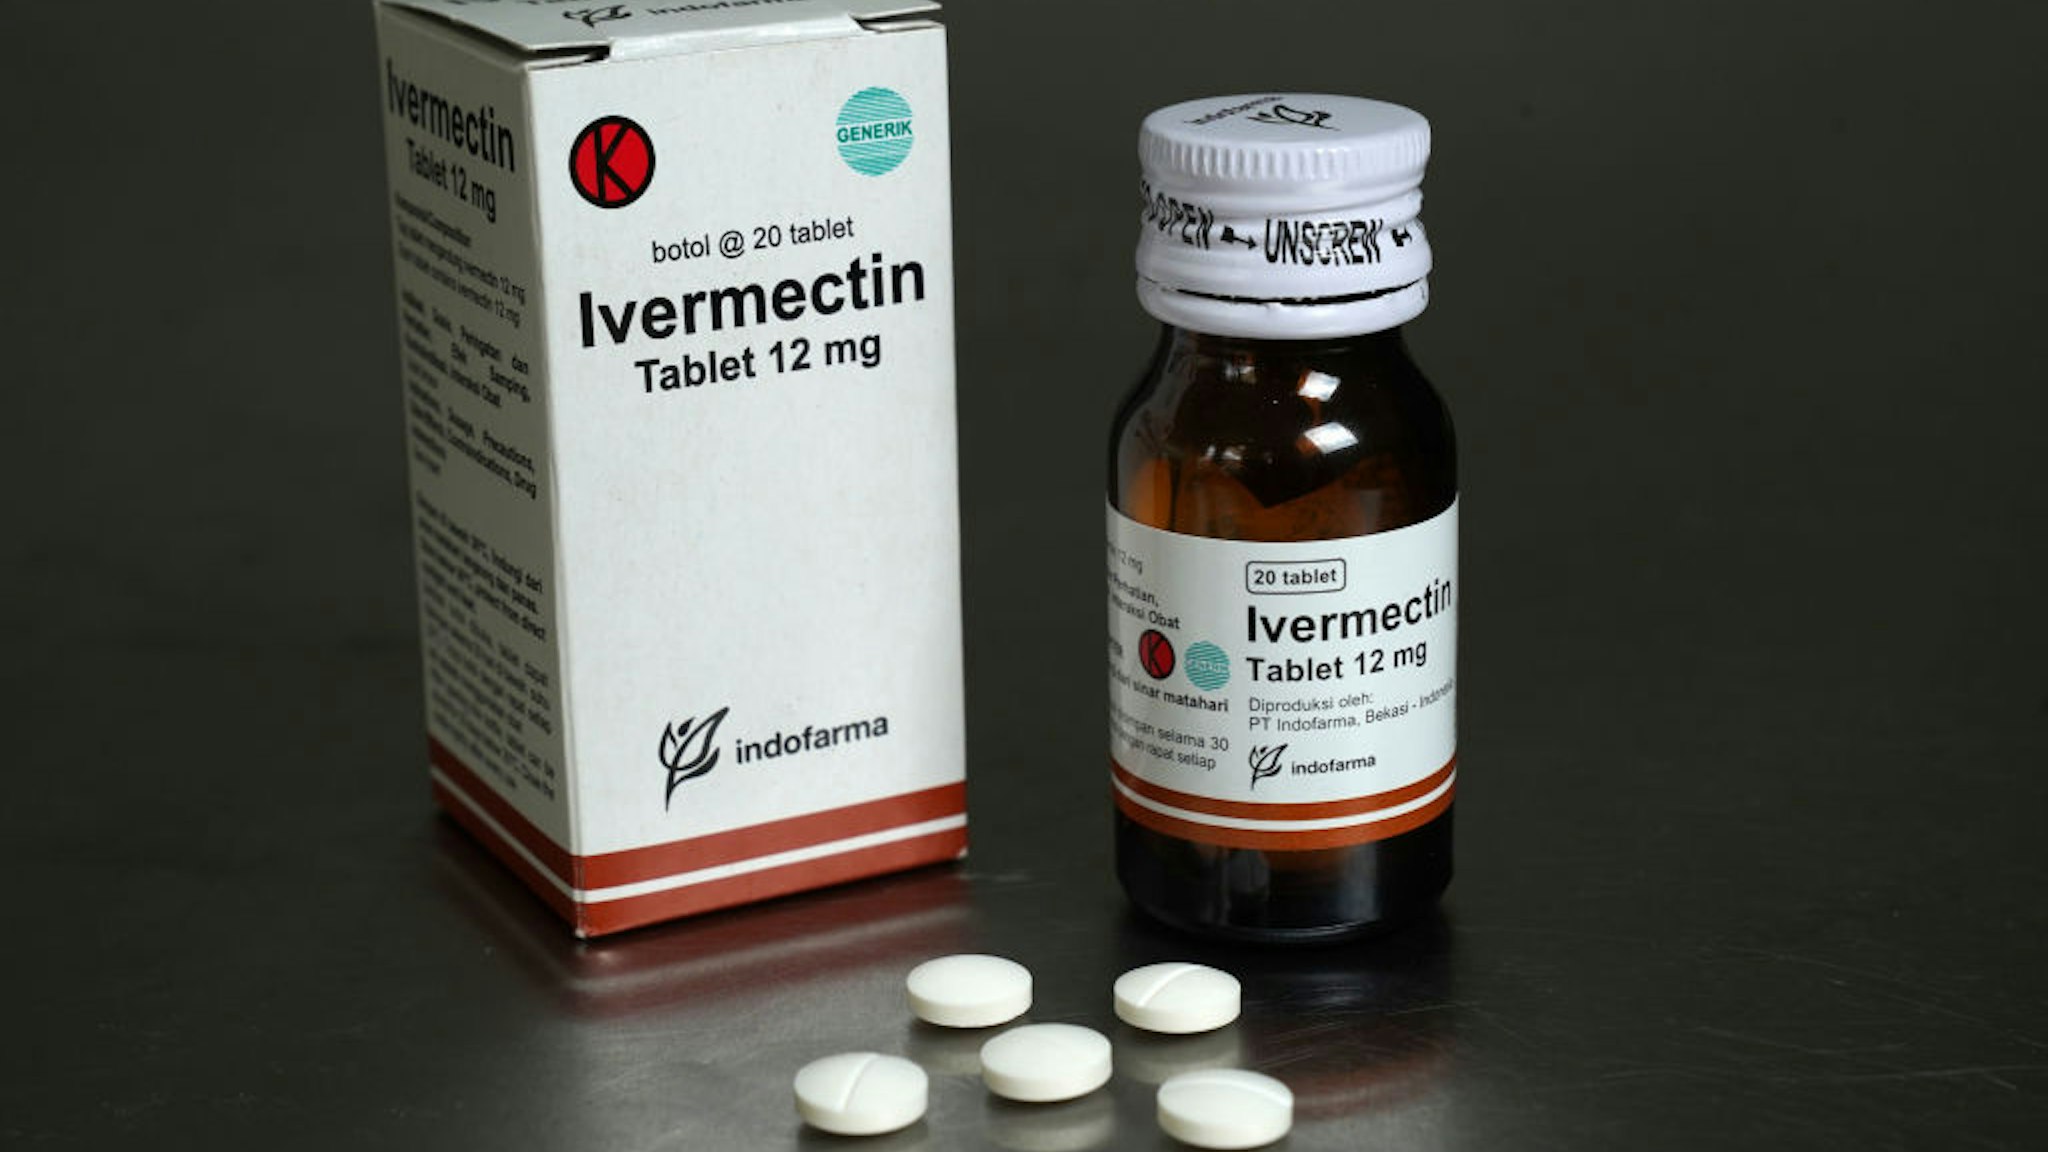 Ivermectin tablets arranged in Jakarta, Indonesia, on Thursday, Sept. 2, 2021. The U.S. Food and Drug Administration warned Americans against taking ivermectin, a drug usually used on animals, as a treatment or prevention for Covid-19.